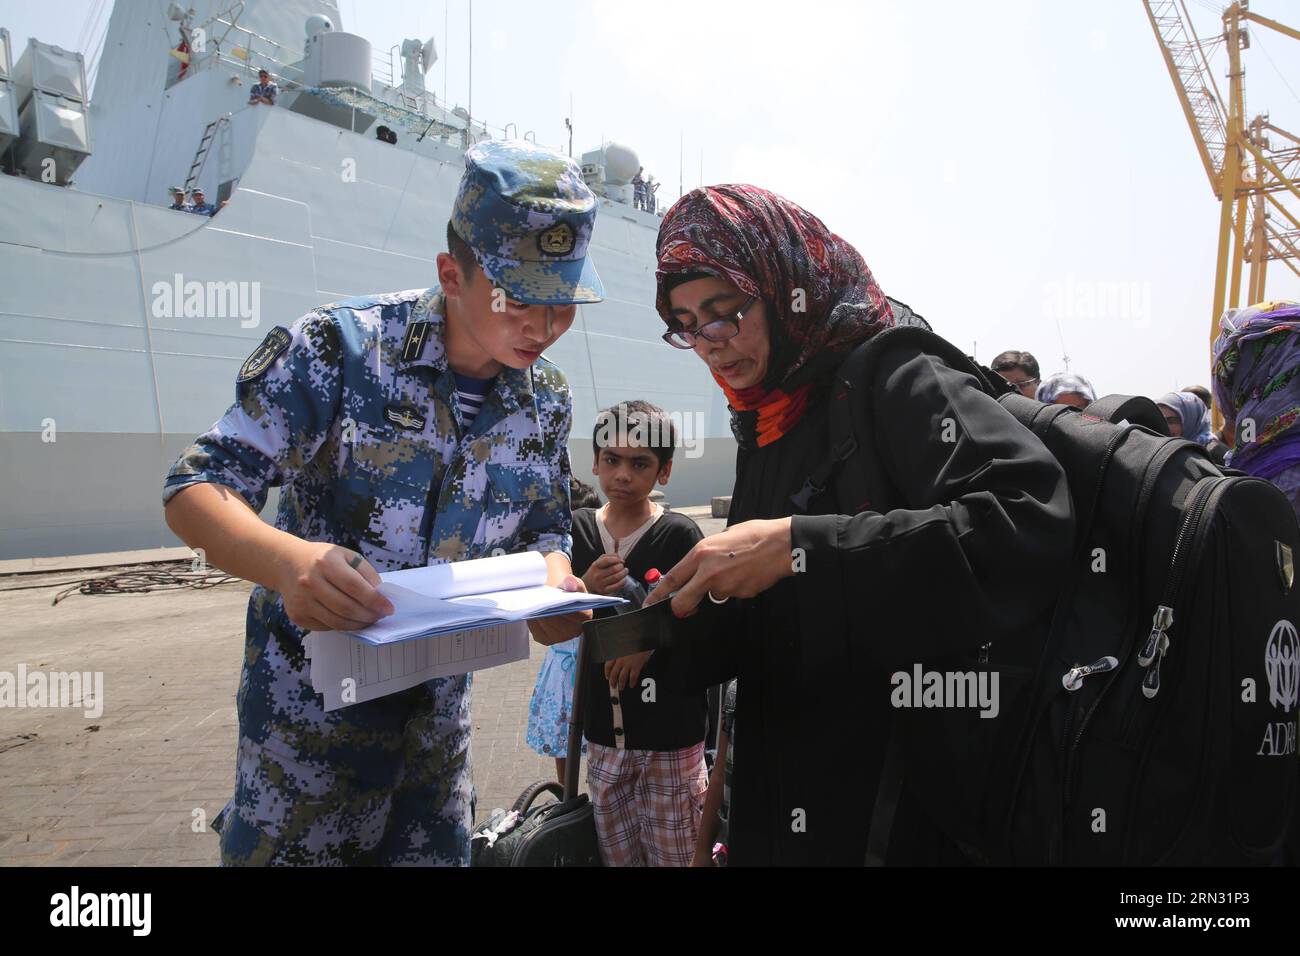 A crew member checks the passport of a woman before she board the Chinese Linyi missile frigate in Aden Harbor, Yemen, April 2, 2015. A total of 225 nationals from 10 countries who were evacuated from conflict-ridden Yemen arrived in Djibouti onboard a Chinese frigate on Thursday. ) (zcc) YEMEN-ADEN HARBOR-FOREIGNERS-WITHDRAW PanxSiwei PUBLICATIONxNOTxINxCHN   a Crew member Checks The Passport of a Woman Before She Board The Chinese Linyi Missile Frigate in Aden Harbor Yemen April 2 2015 a total of 225 Nationals from 10 Countries Who Were evacuated from CONFLICT  Yemen arrived in Djibouti Onbo Stock Photo